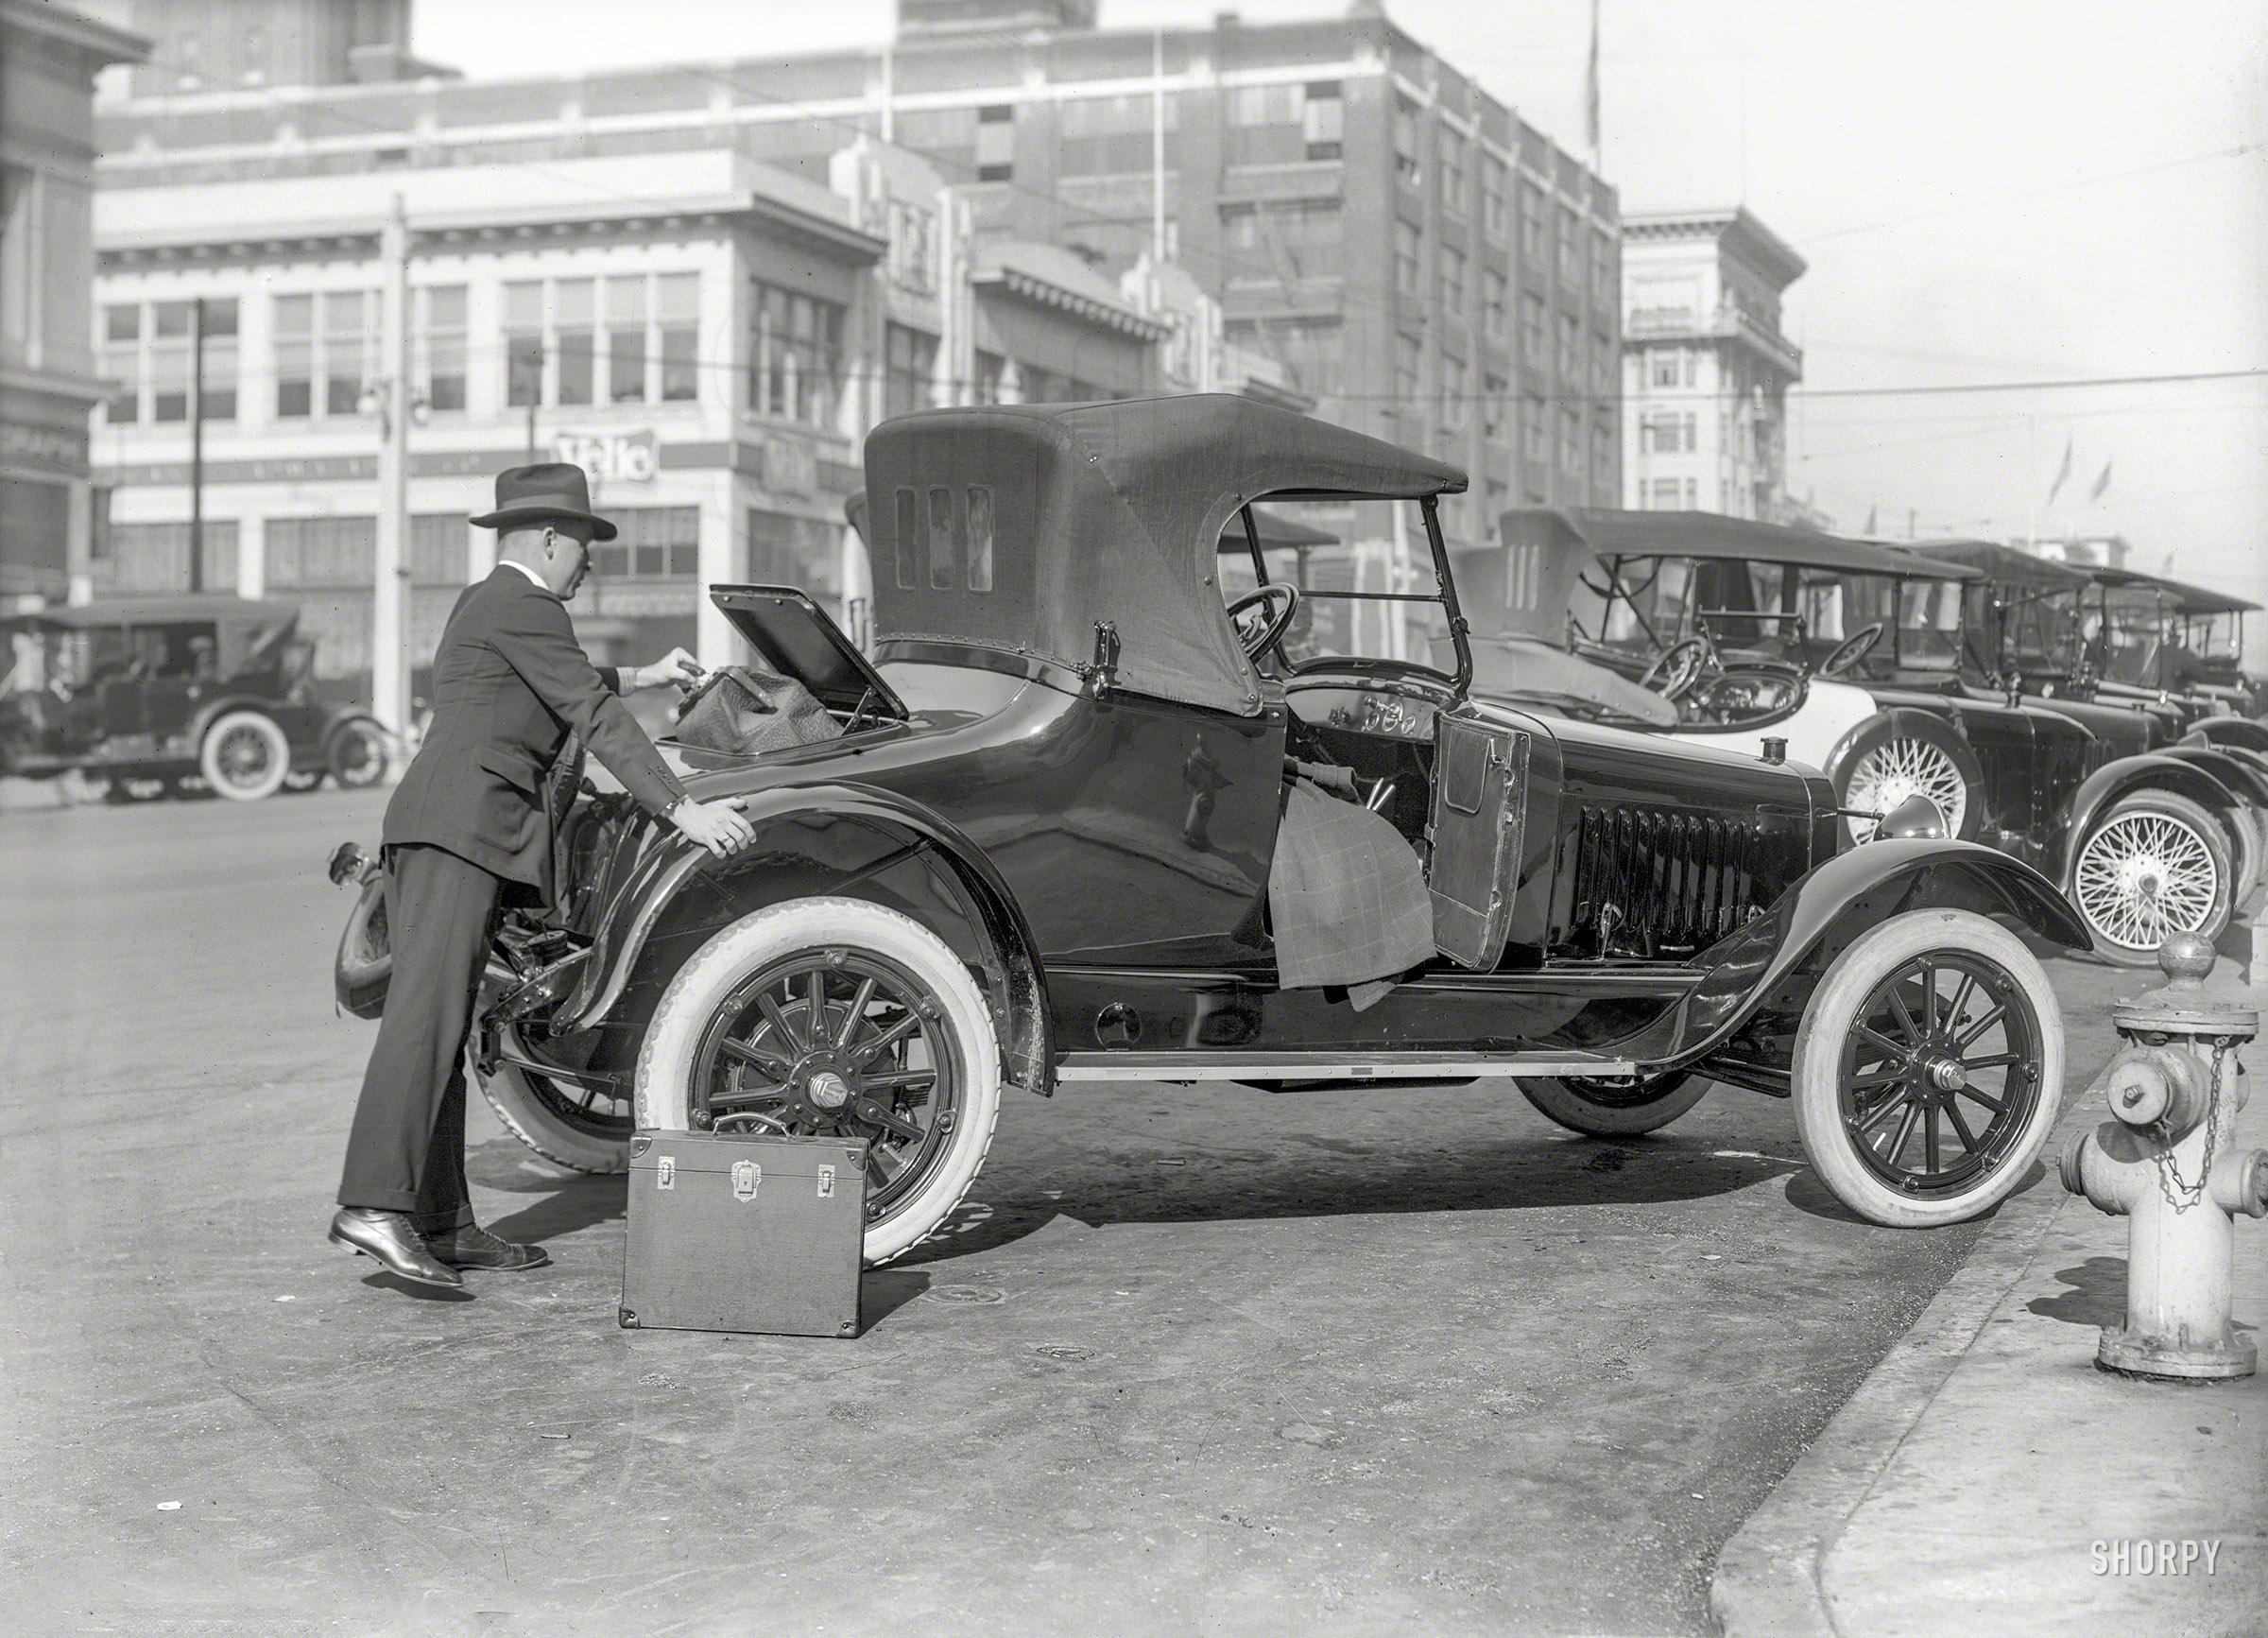 San Francisco circa 1918. "Chalmers Model 6-30 roadster facing N.W. corner Van Ness Avenue and Sutter Street." Note the Velie showroom at the intersection. 5x7 inch glass negative by Christopher Helin. View full size.